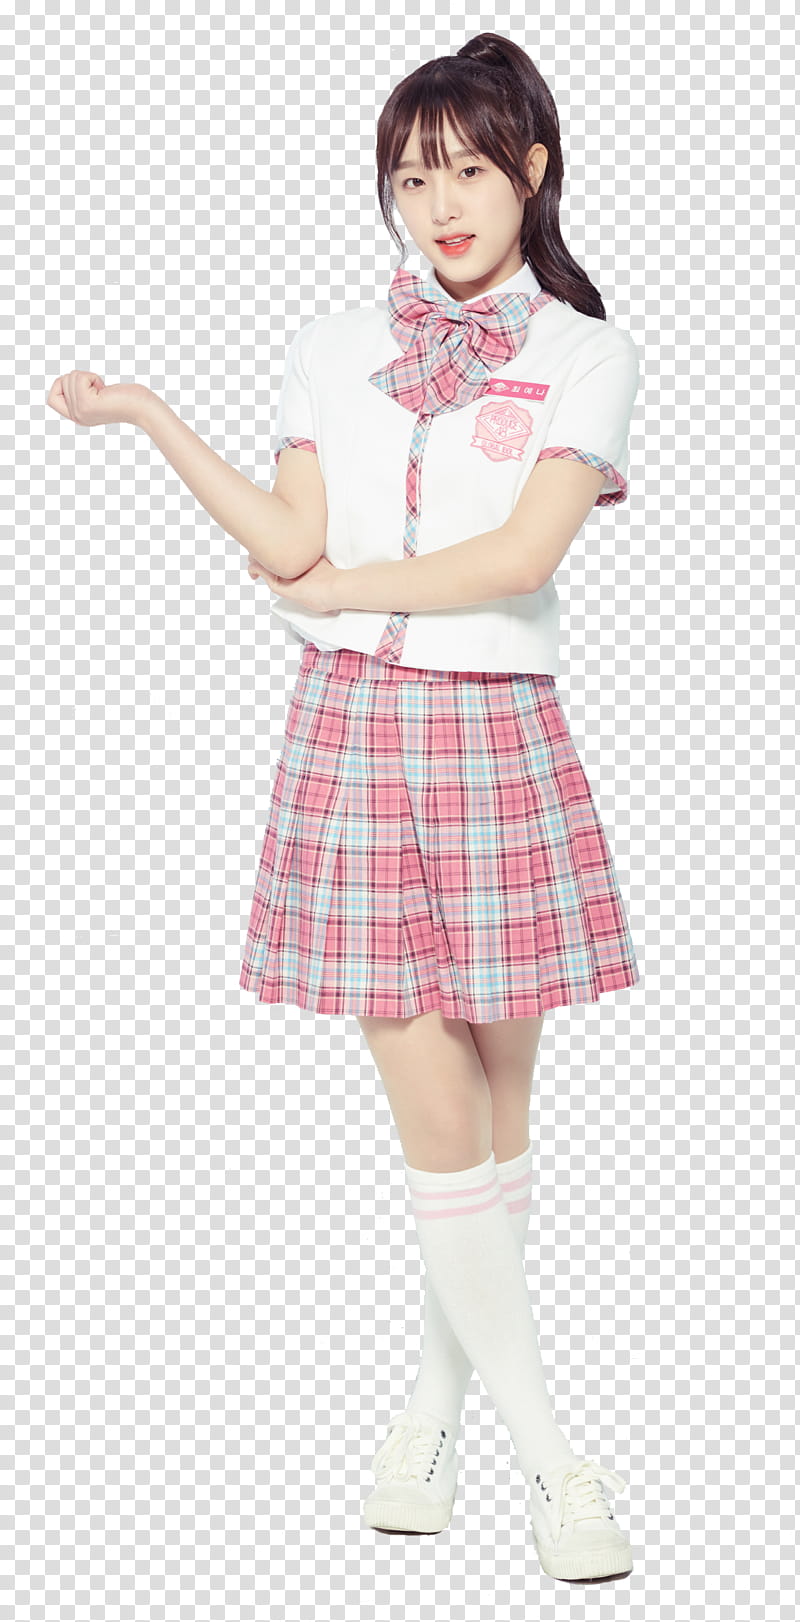 Choi Yena Produce IZ ONE, woman in pink and white plaid skirt transparent background PNG clipart